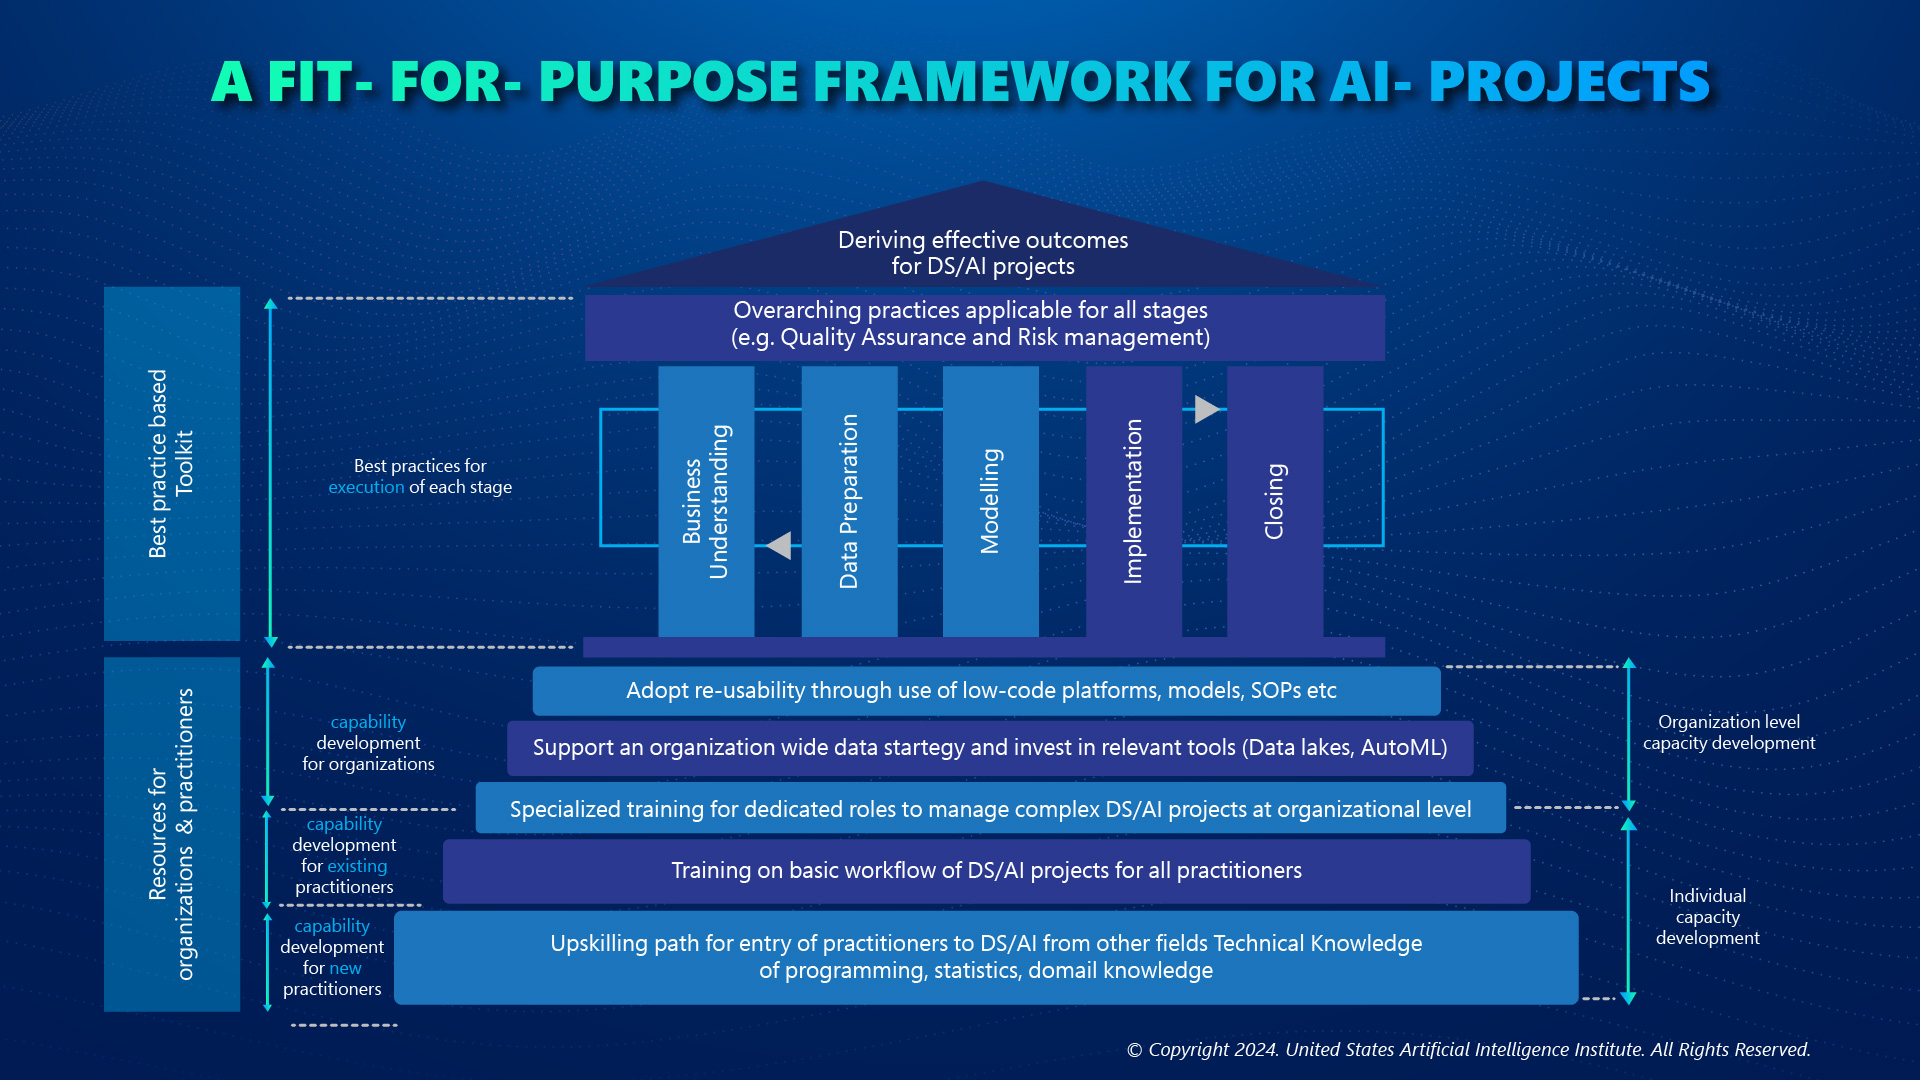 A FIT FOR PURPOSE FRAMEWORK FOR AI PROJECTS